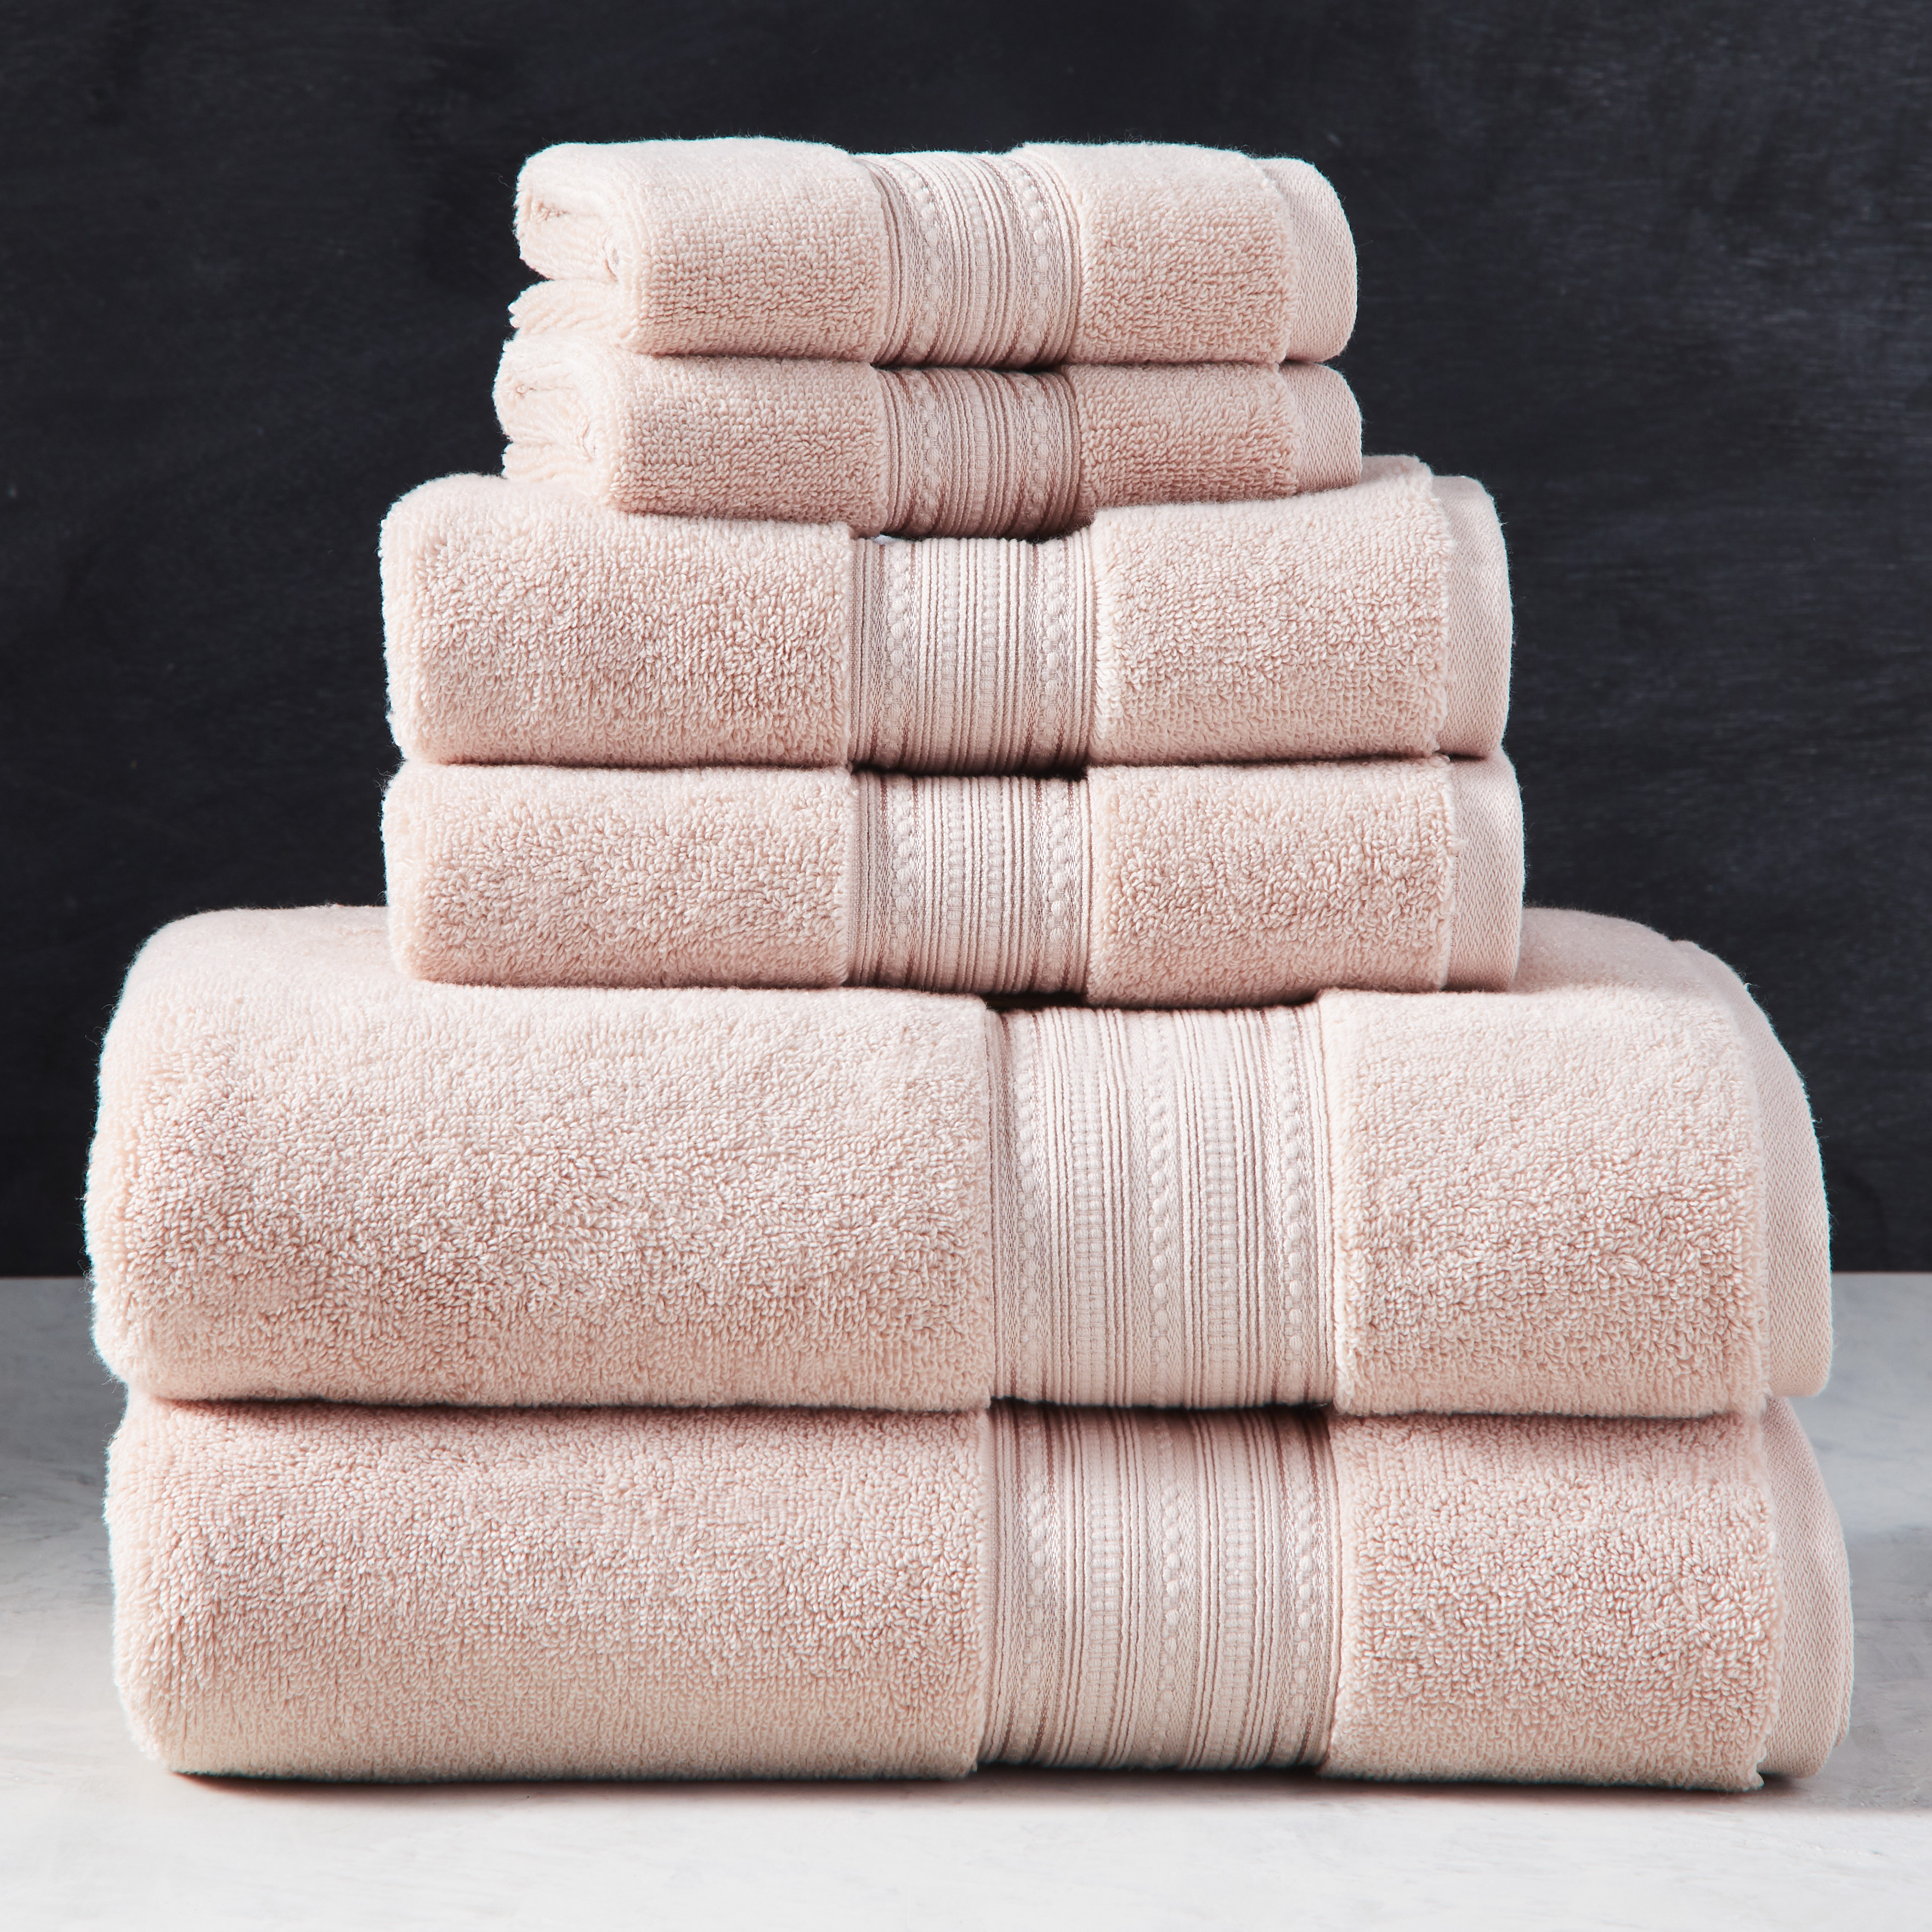 Better Homes & Gardens Signature Soft 6 Piece Solid Towel Set, Cherry Blossom Pink - image 1 of 7